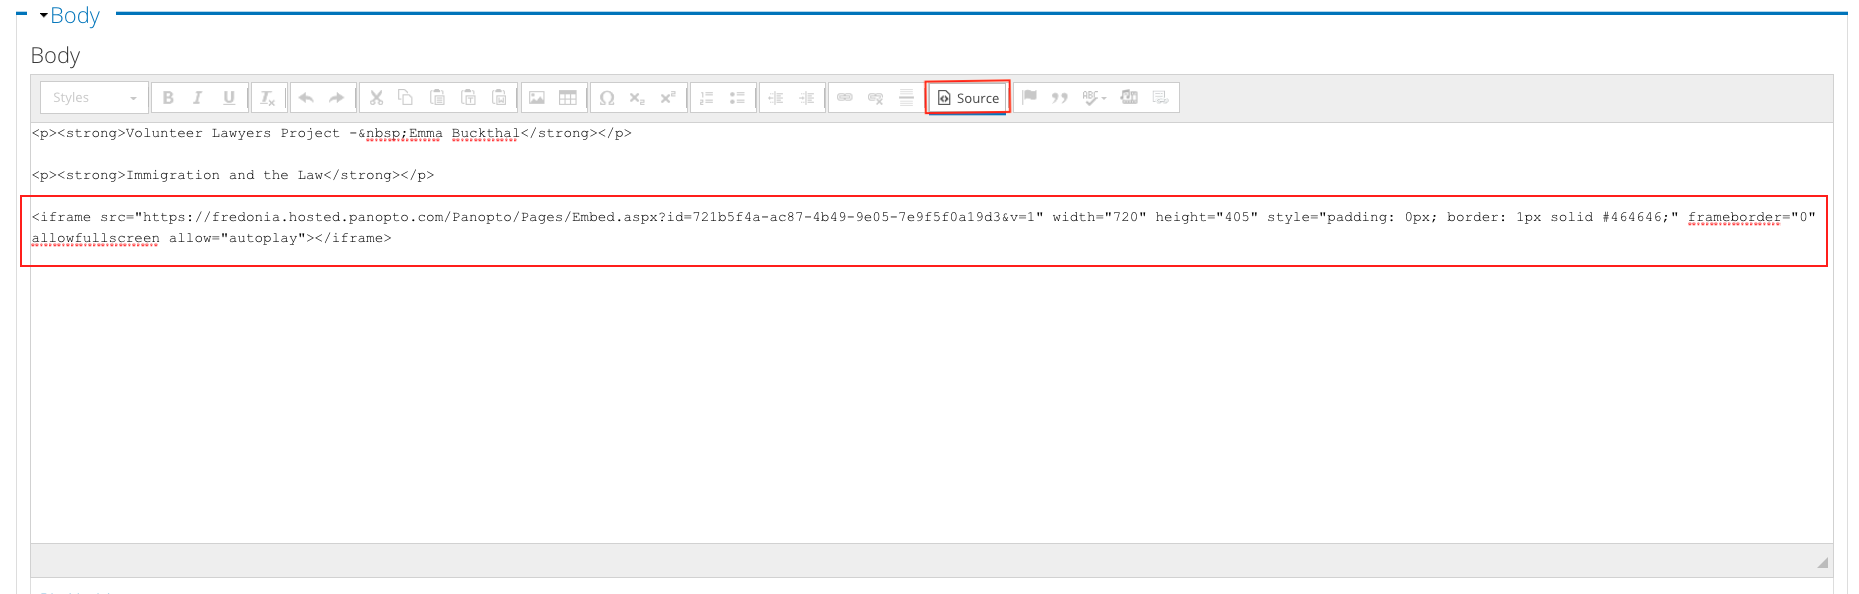 In Drupal, use Source button, then paste code into the correct location